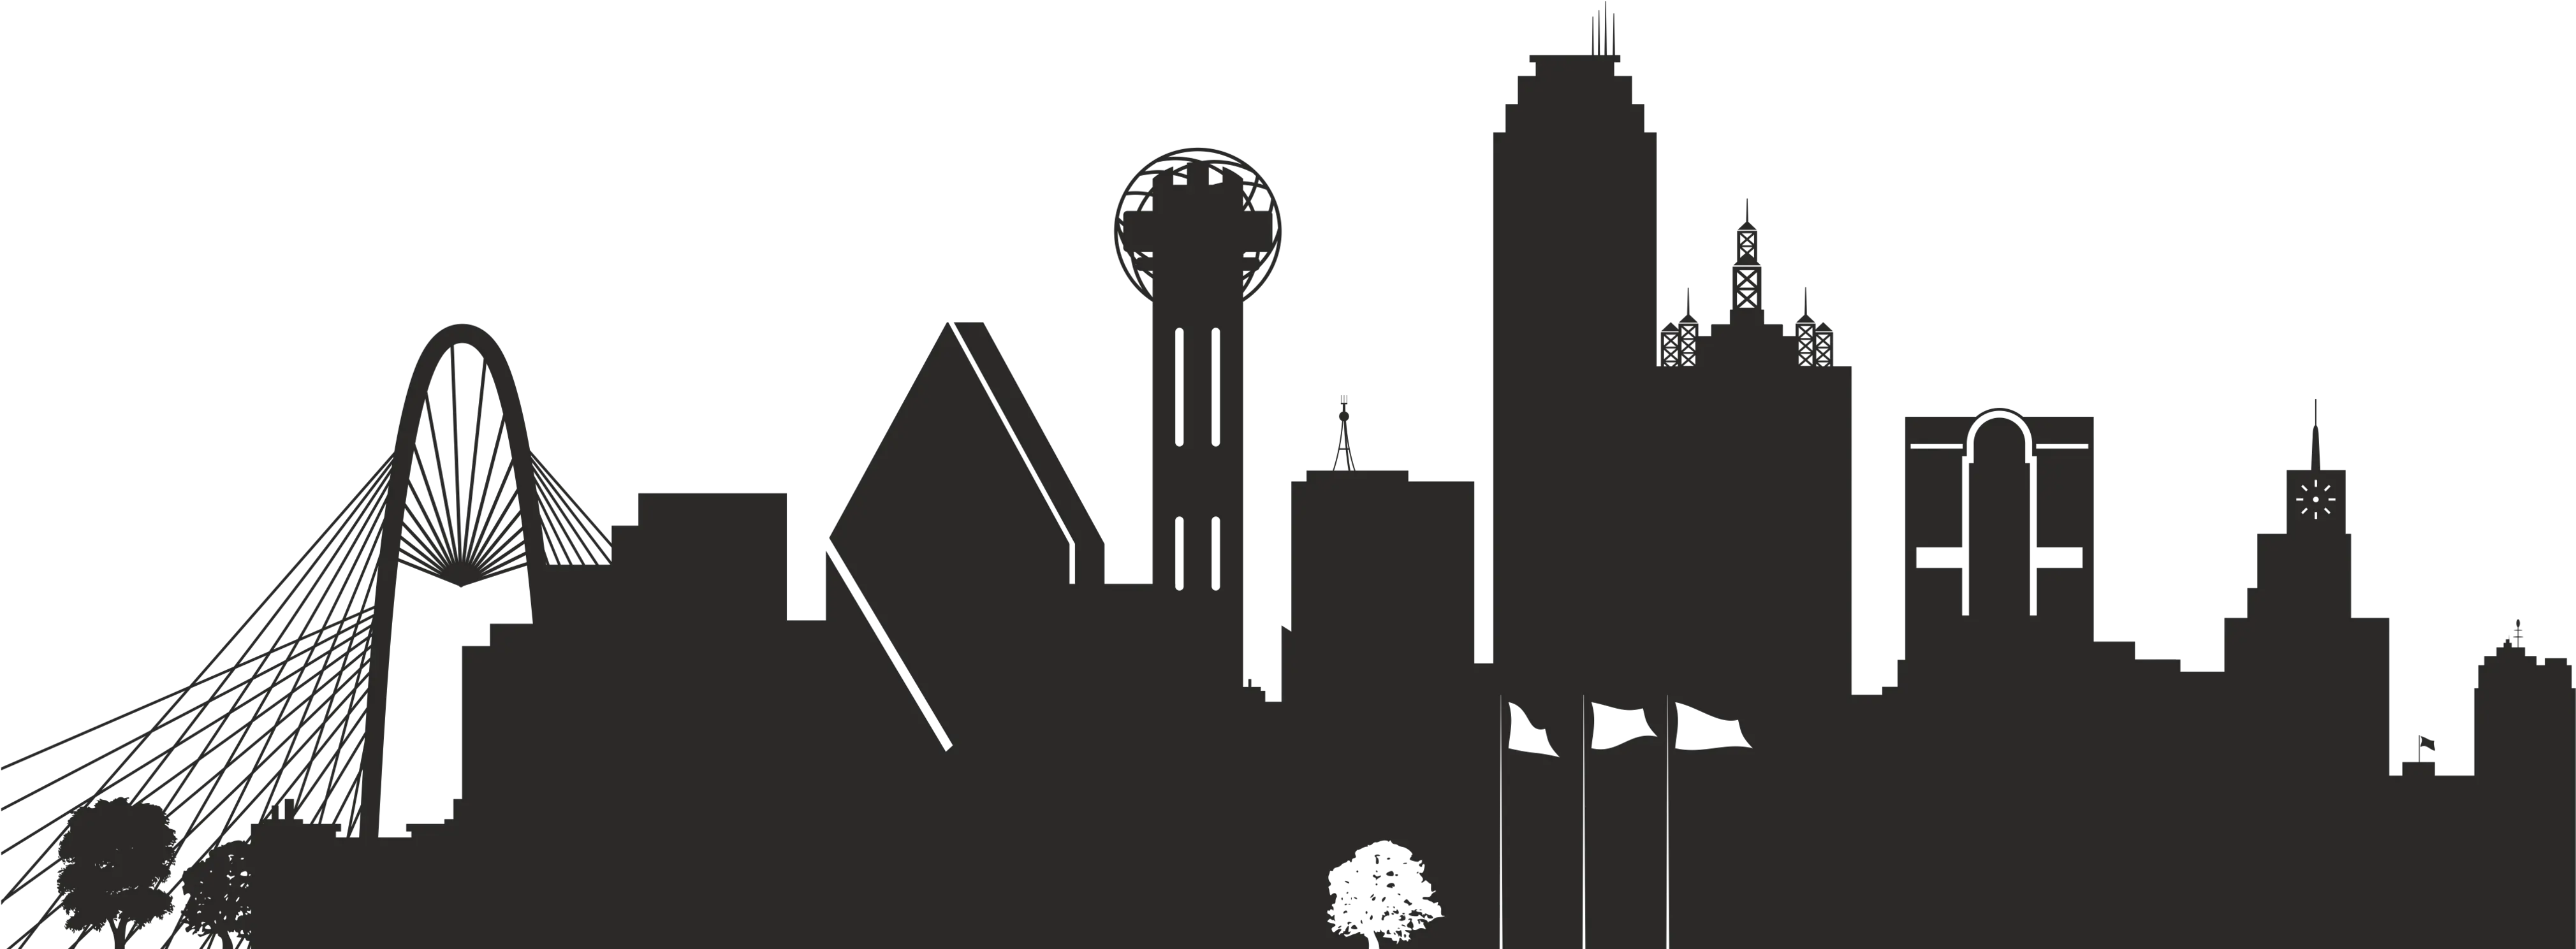 Skyline Silhouette Png First Name Silhouette Dubai Uae National Day Gif Skyline Png